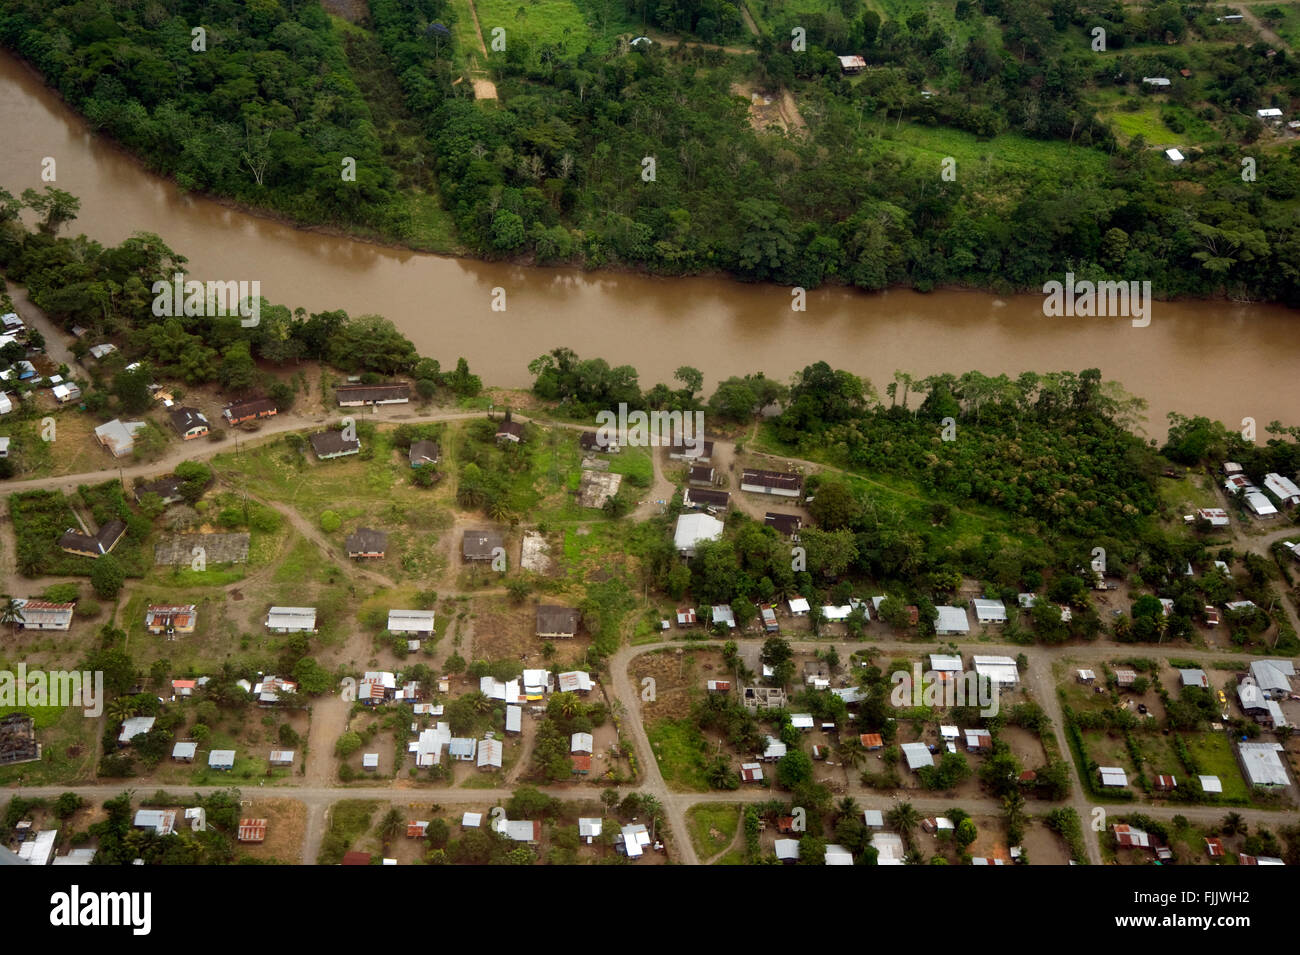 Homes in a town along the Amazon river in Ecuador near Guayaquil Stock Photo